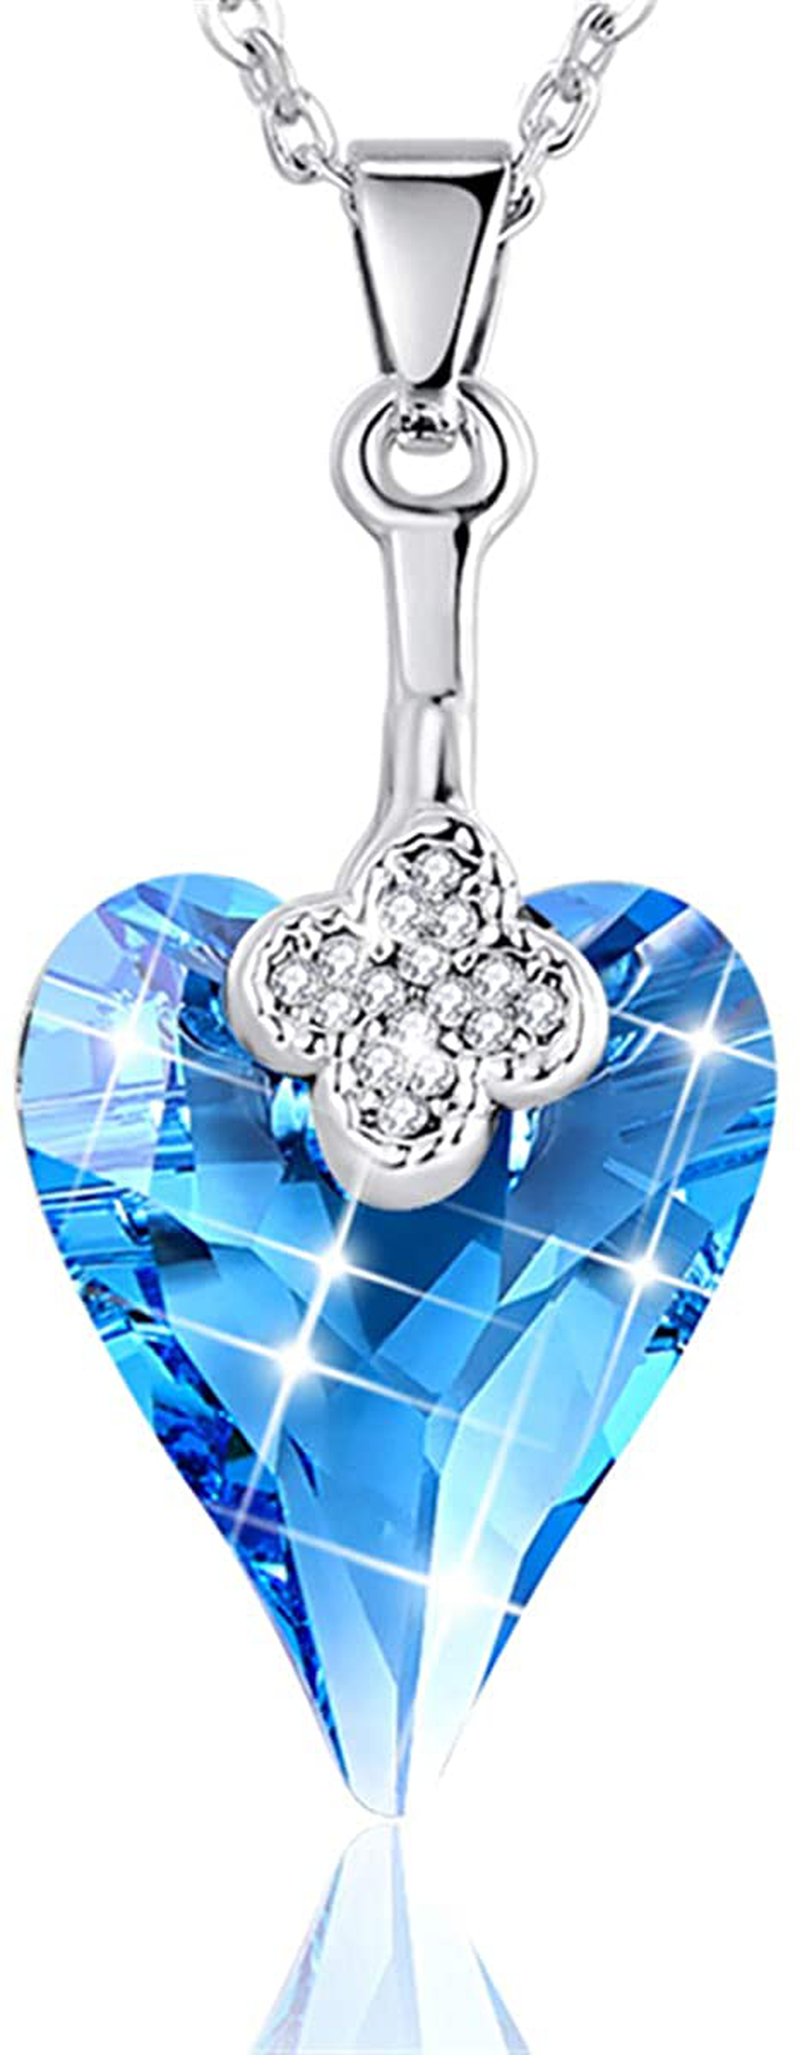 Womens Heart Pendant Necklace Austrian Crystal White Gold Plated Chain Jewelry W/Gift Box